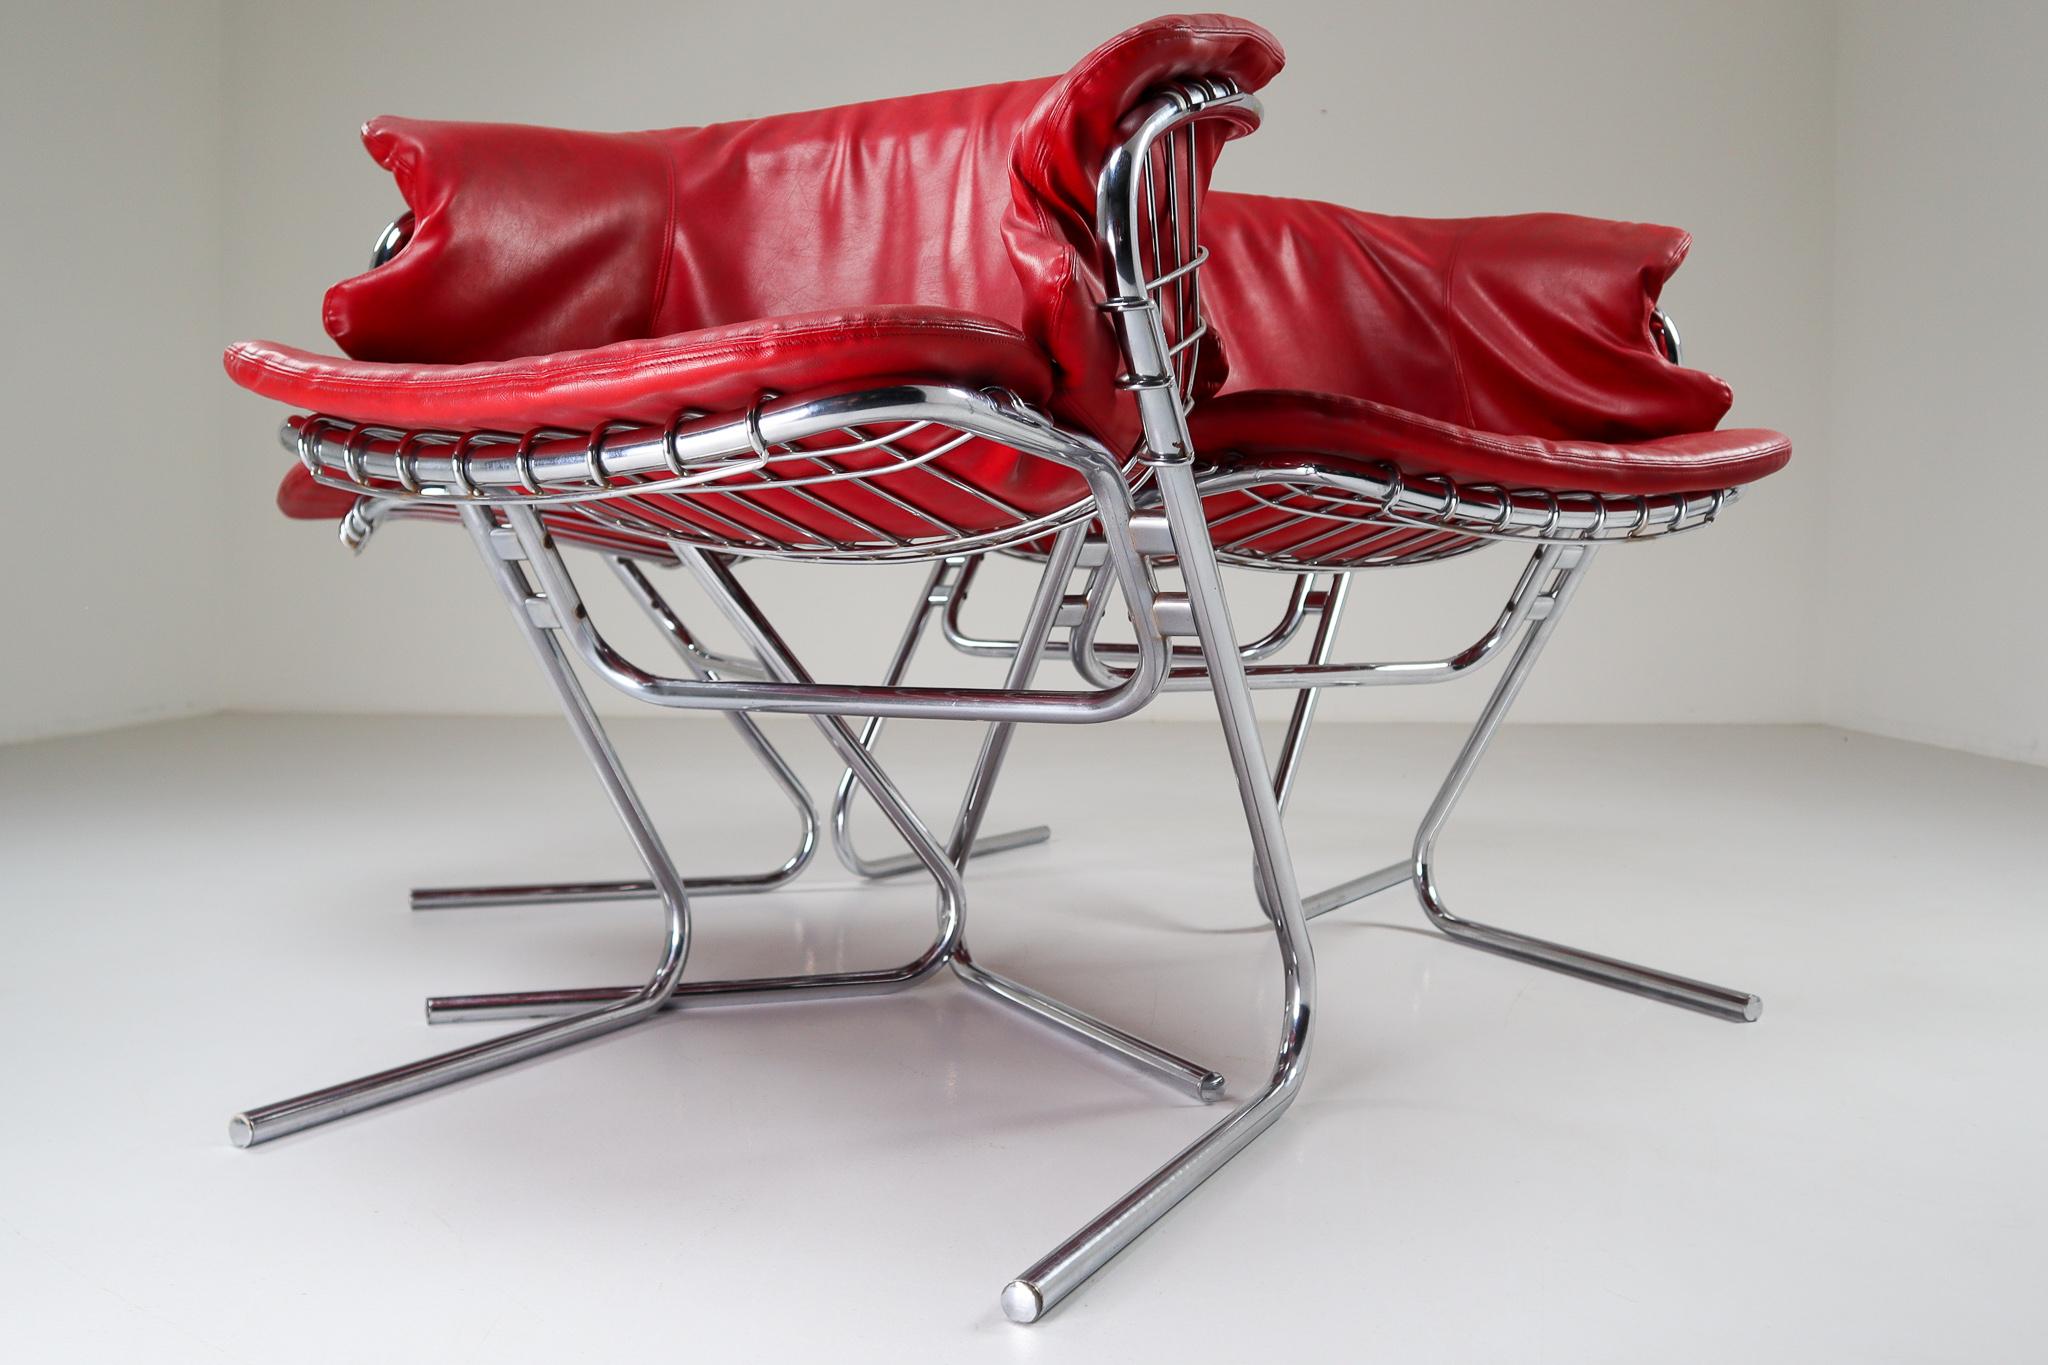 Set of four Italian dining chair designed by Gastone Rinaldi for RIMA, 1970s
Curved chrome steel chair, with seat and backrest covered in a red leather, original of the 1970s. Produced by the RIMA Company, in Padova, and designed by Gastone